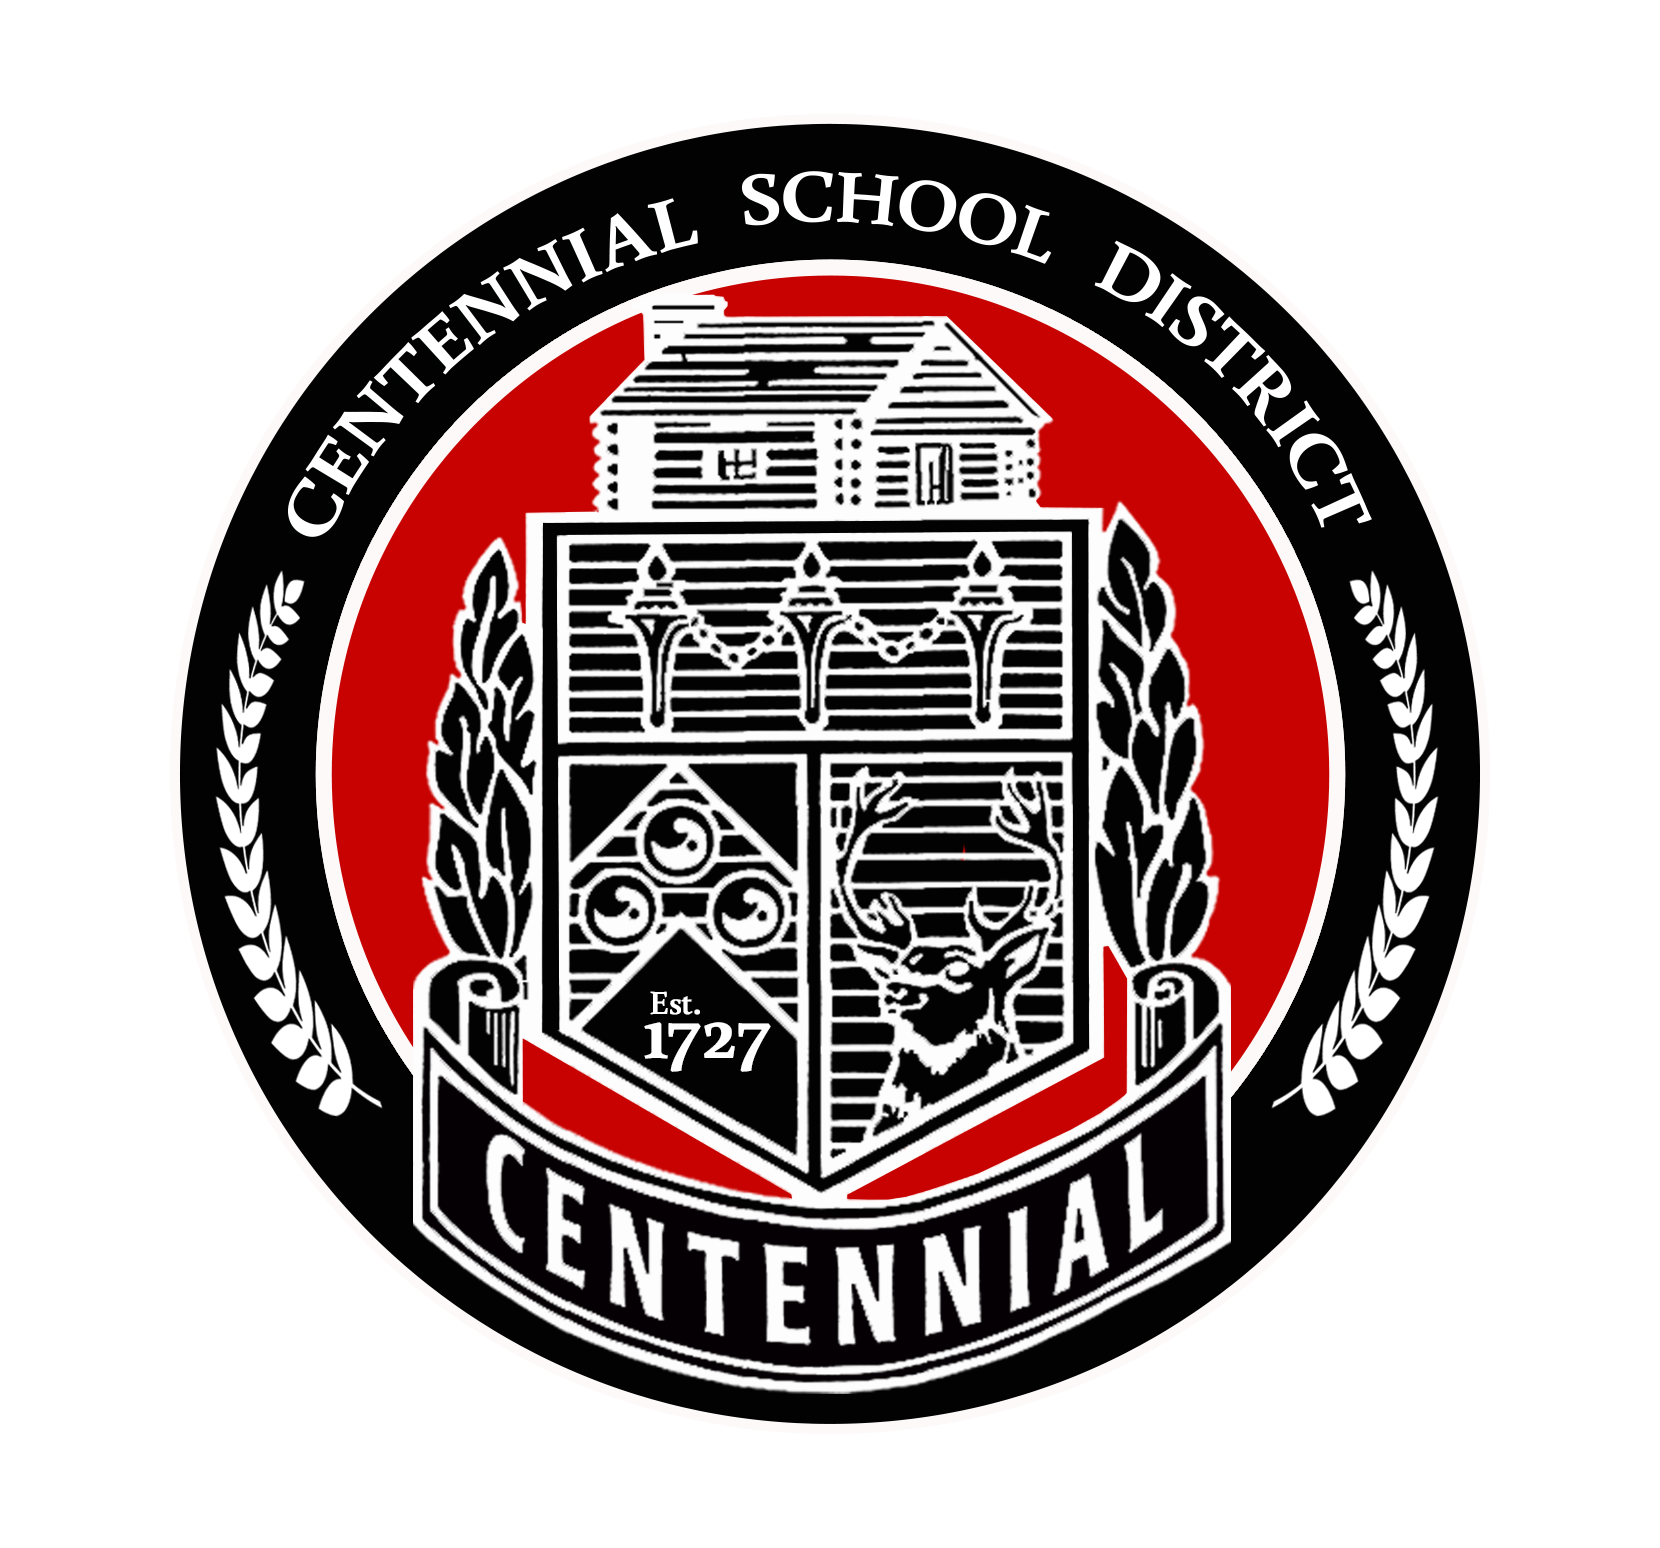 Centennial School Dsitrict name with emblem forming their logo